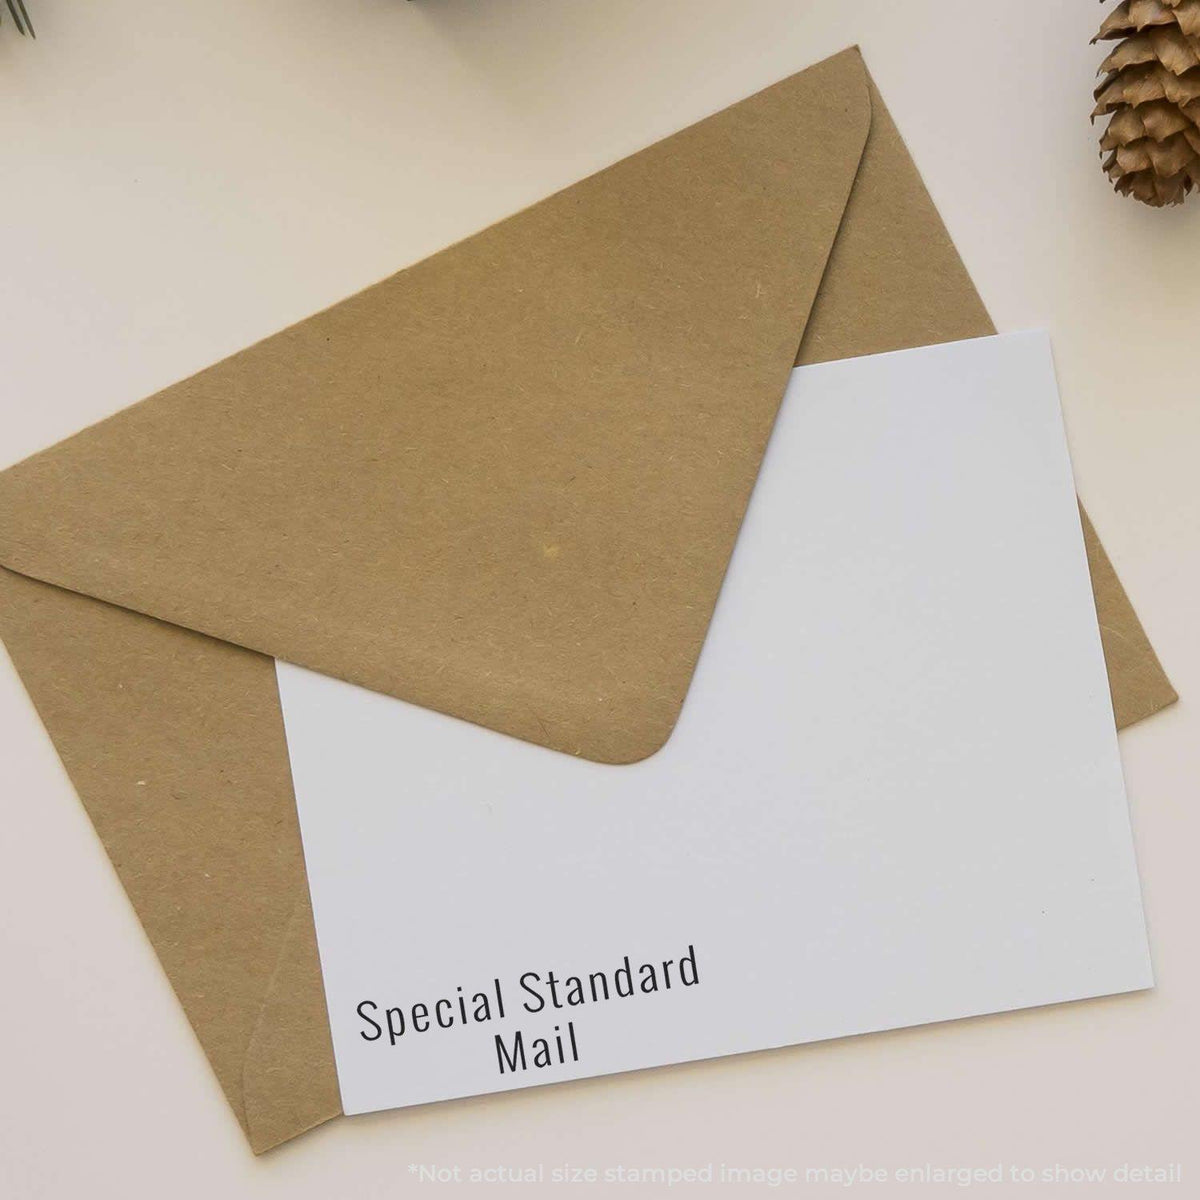 Special Standard Mail Rubber Stamp In Use Photo